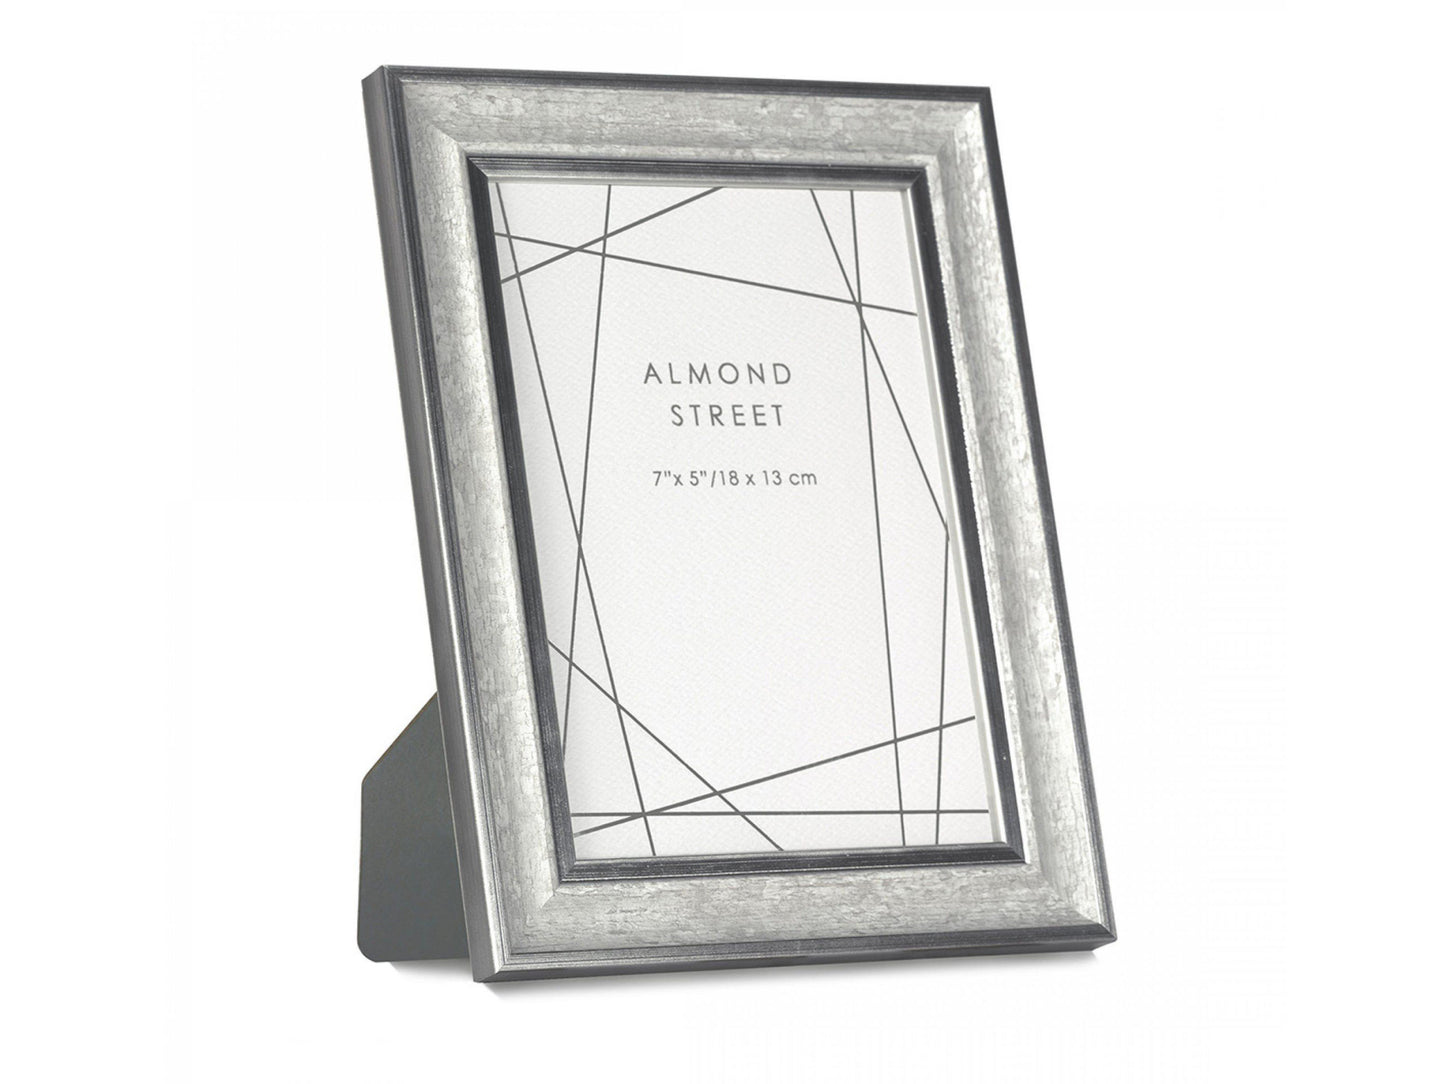 A silver and dark grey frame with a moulded surround